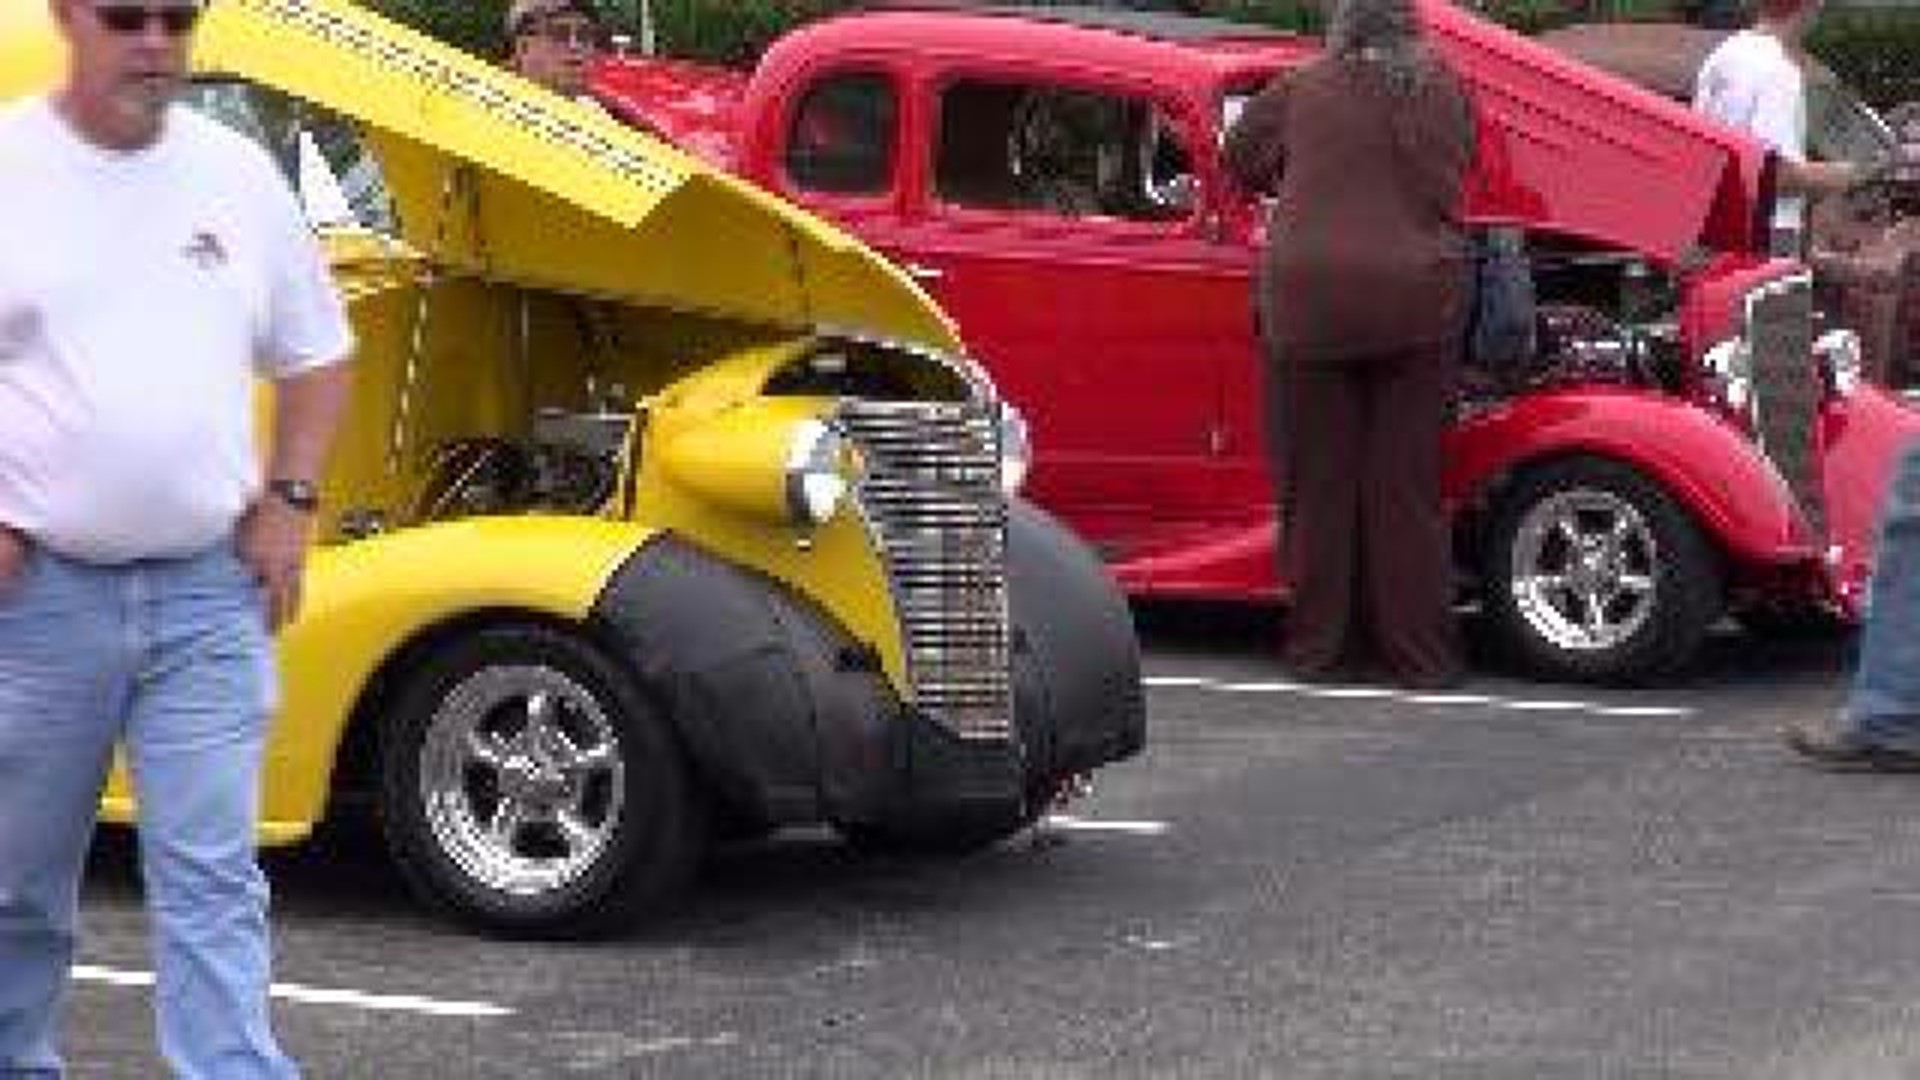 Collectors wow crowd at classic car show